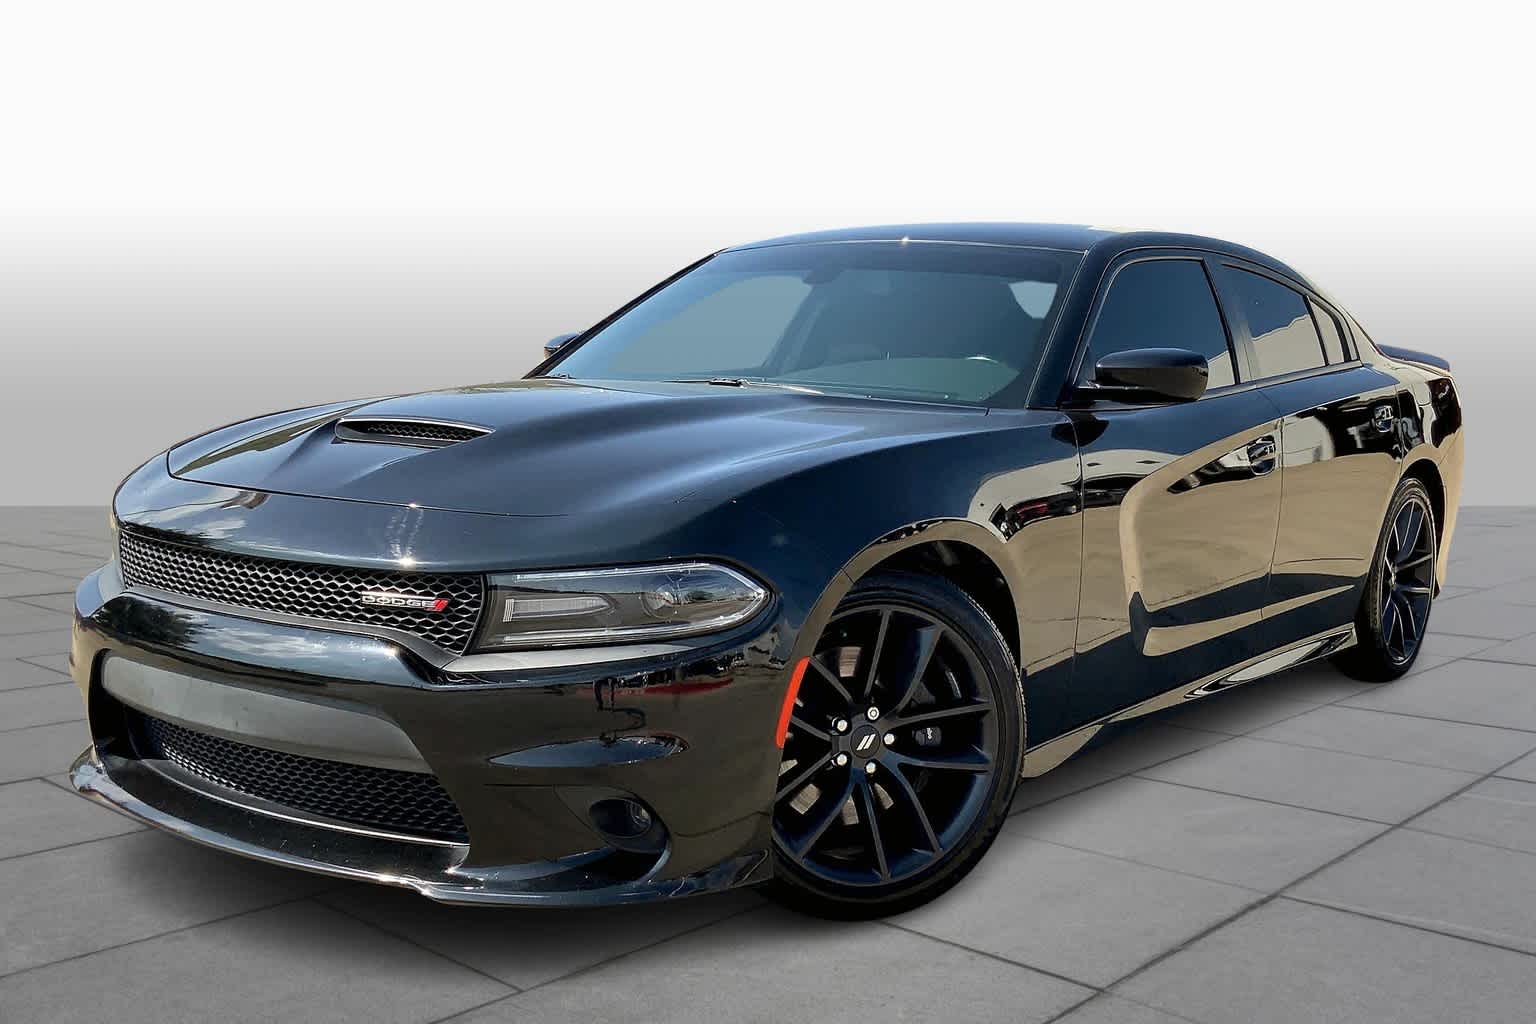 2021 Dodge Charger GT RWD